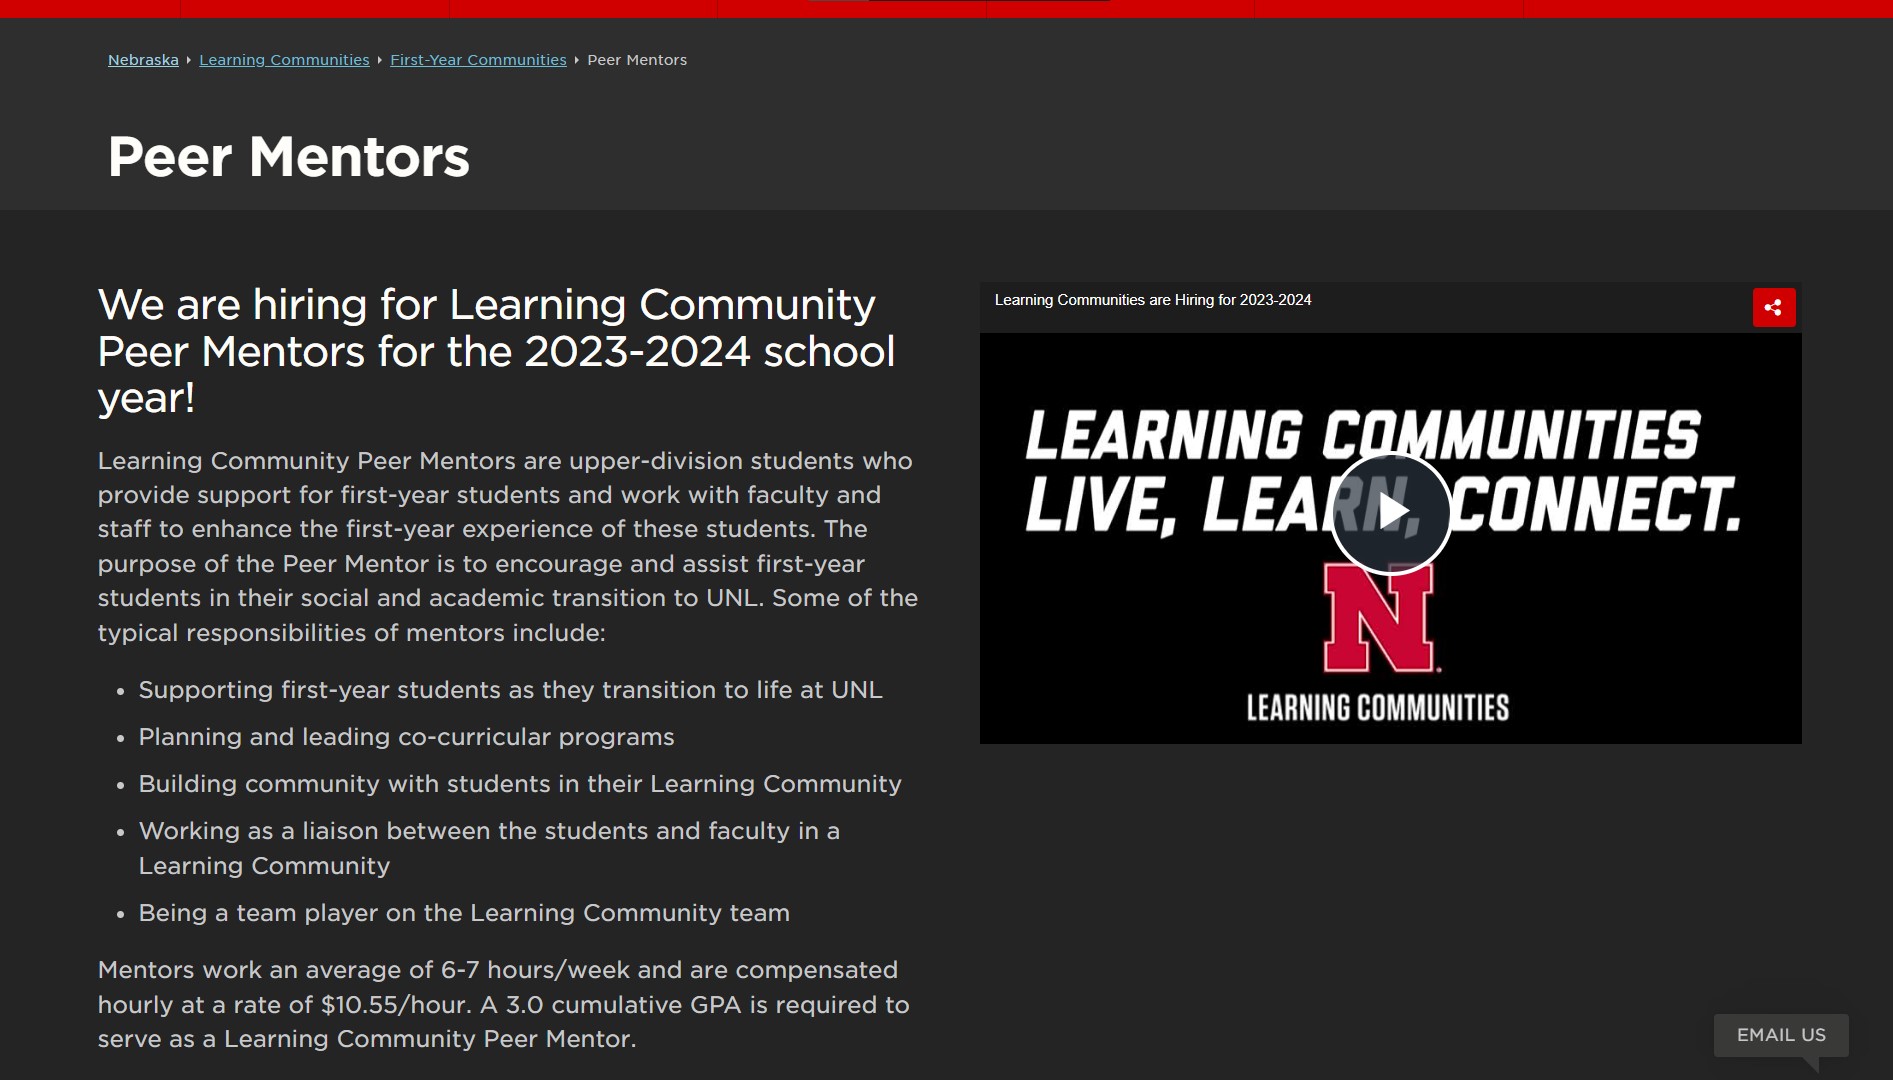 Learning Communities are Hiring for the 20232024 School Year